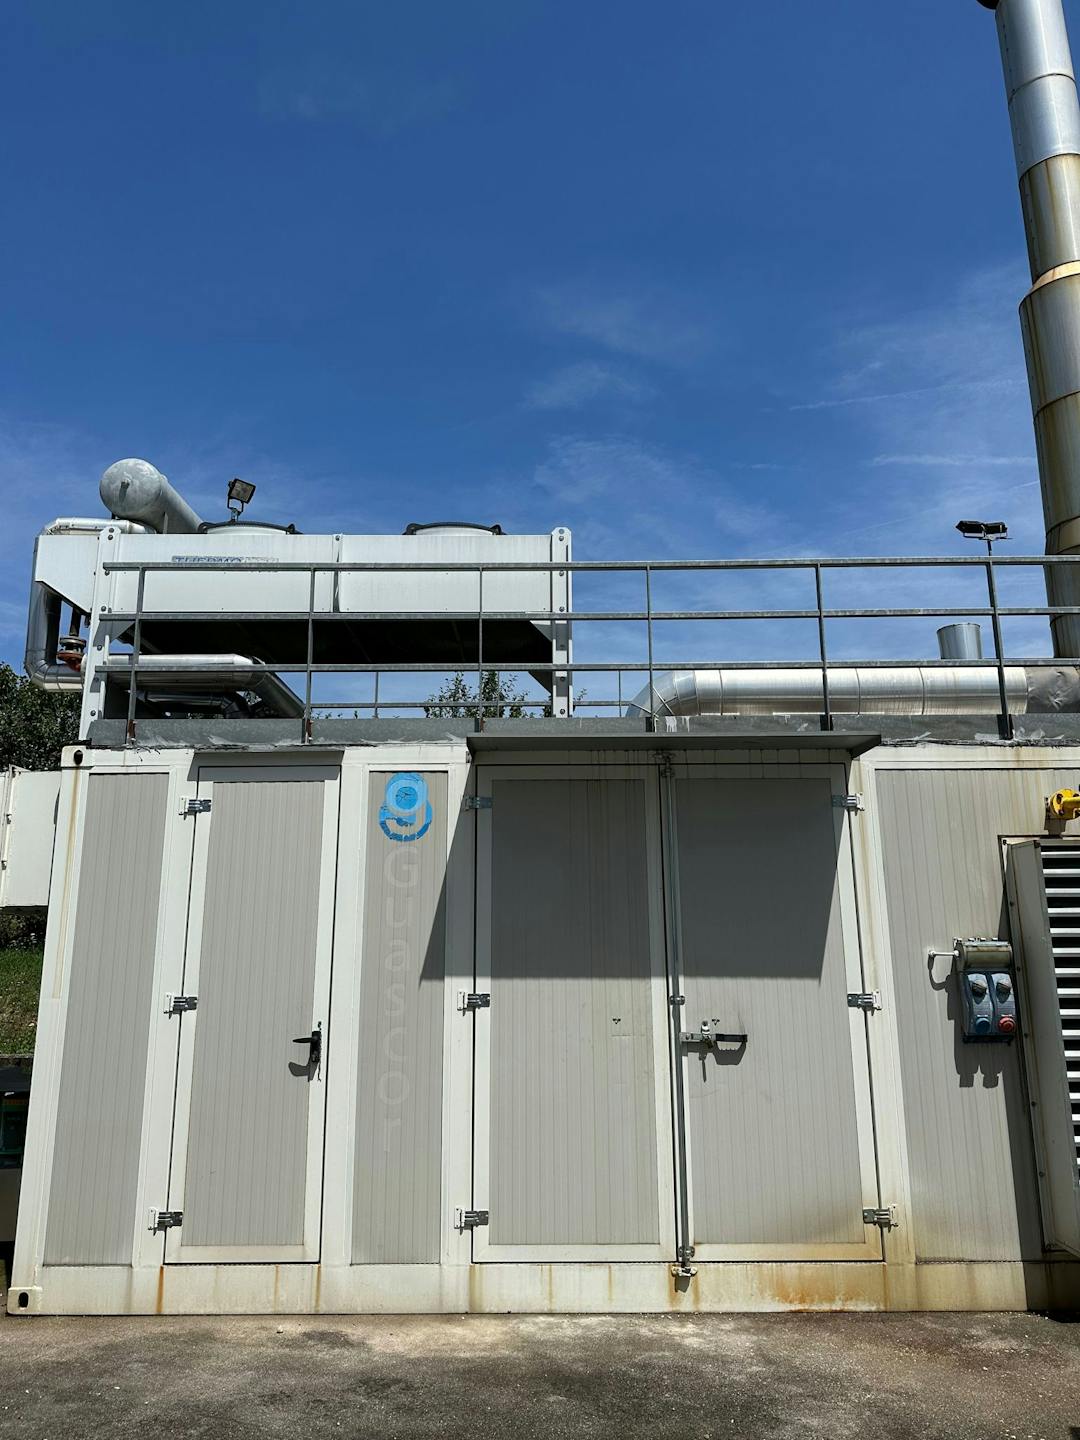 nullPhoto of Guascor FGLD180 Natural Gas Generator Set showing outside of containerized plant - preowned gas generator for sale uk